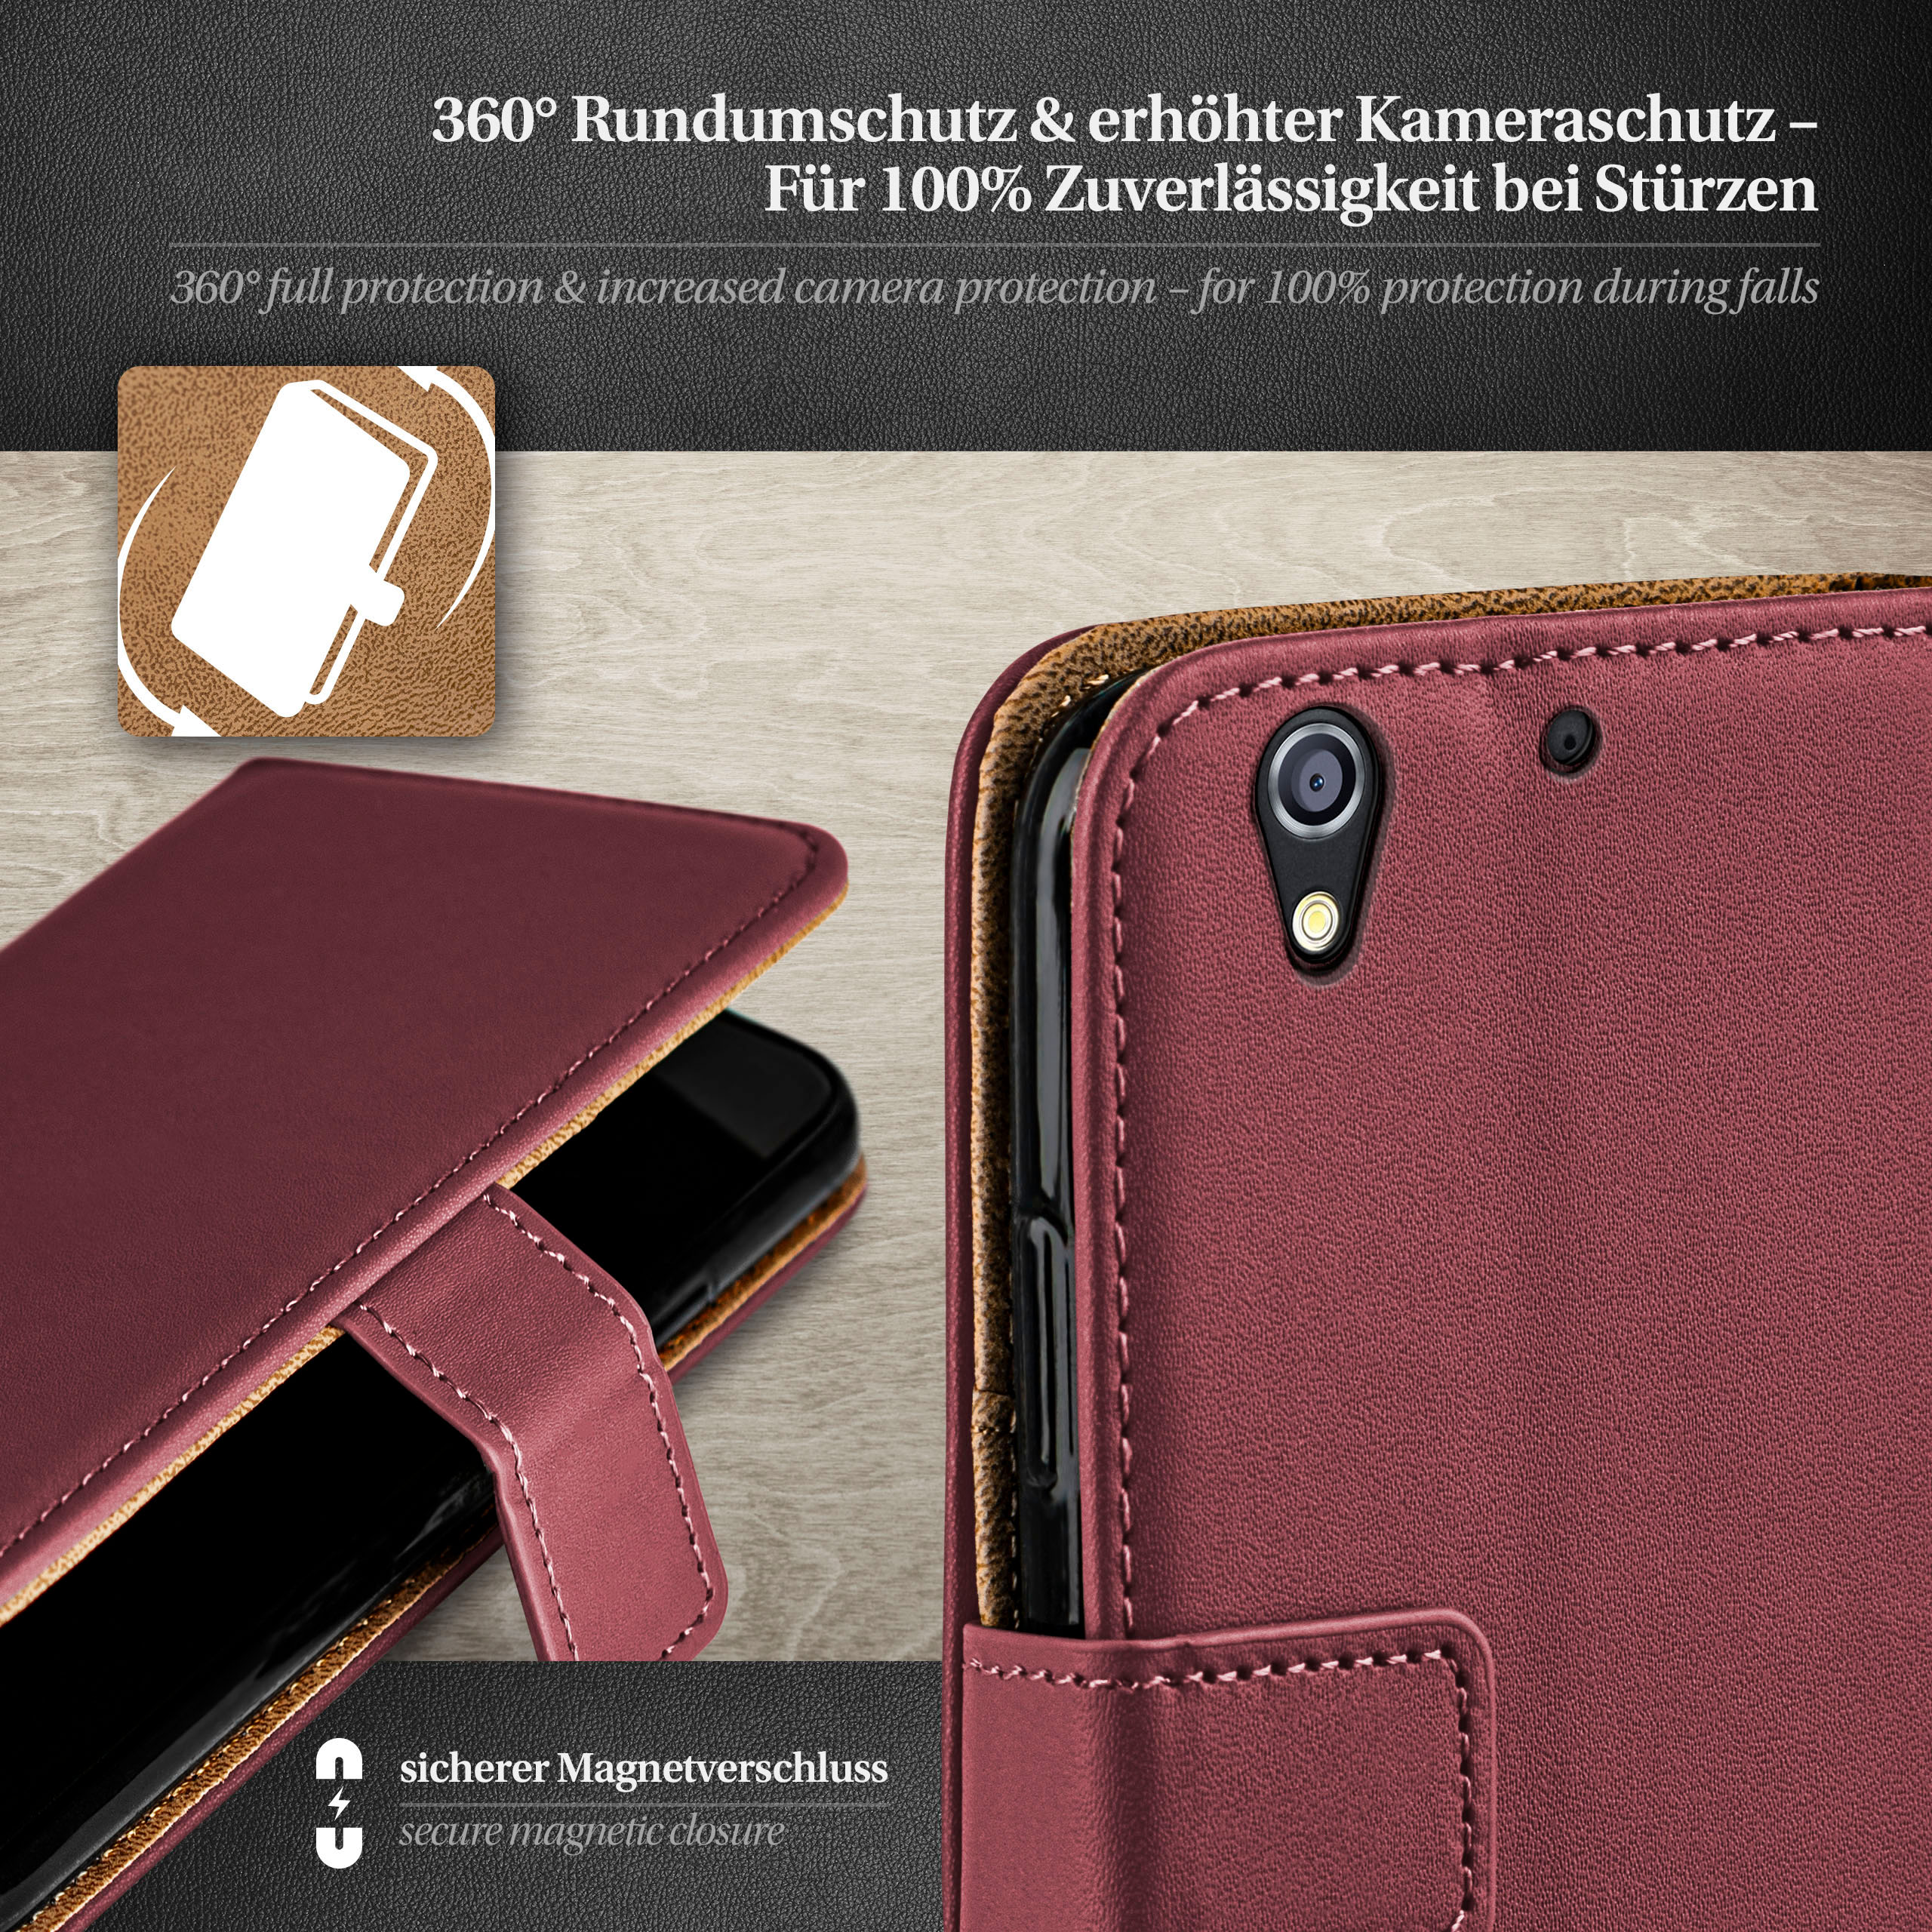 Bookcover, MOEX HTC, Book Maroon-Red Desire Case, 626G,